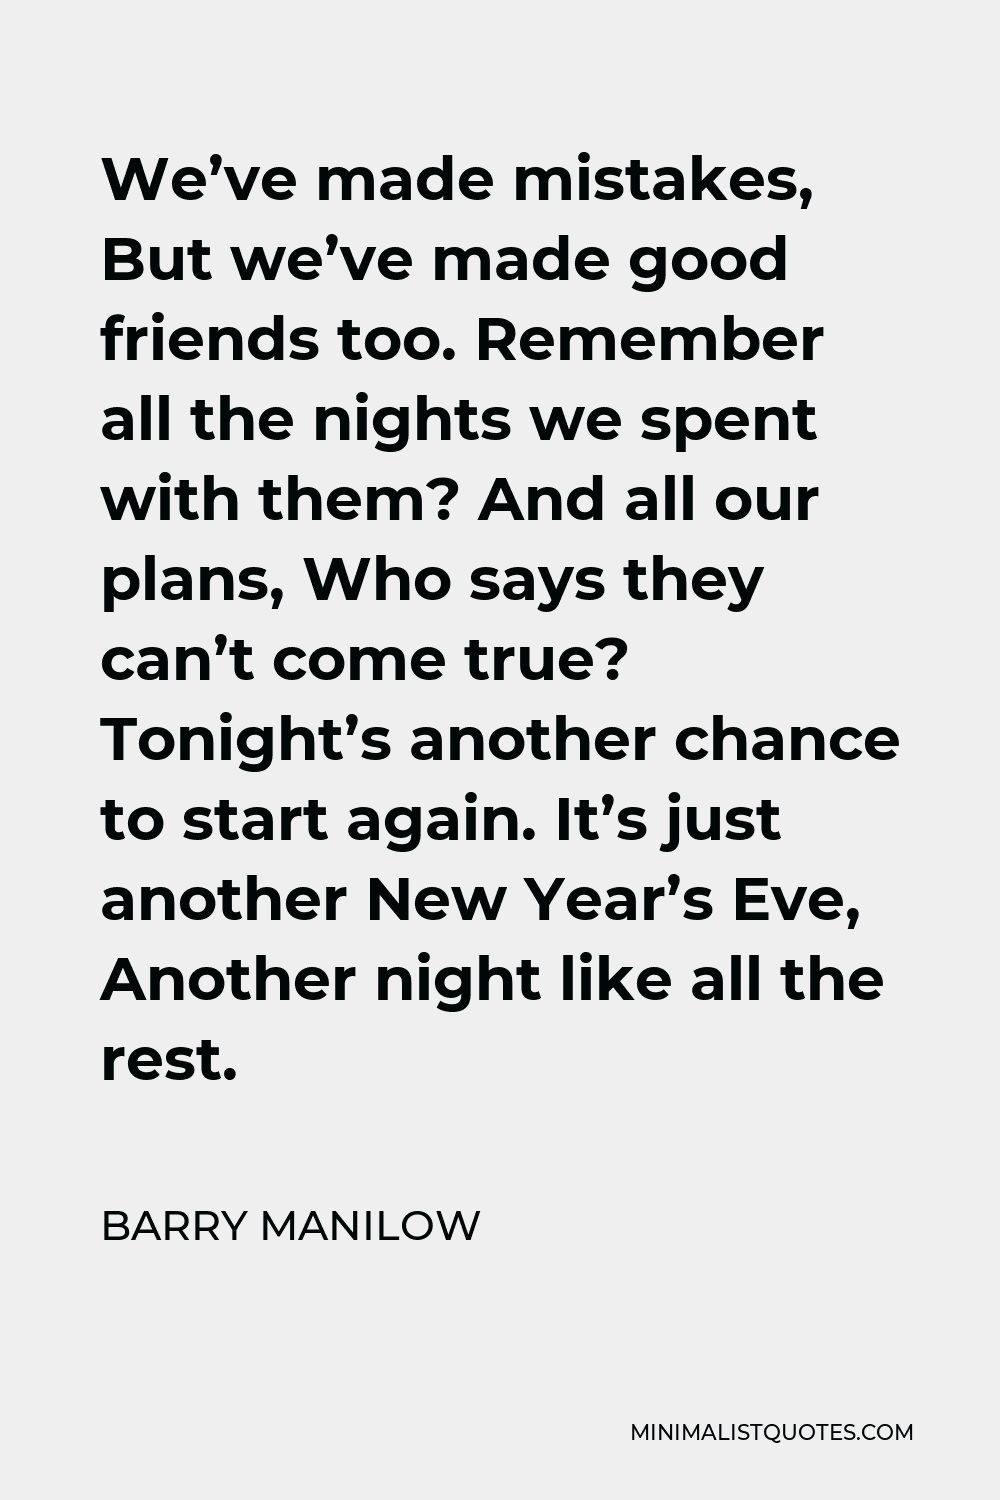 Barry Manilow Quote - We’ve made mistakes, But we’ve made good friends too. Remember all the nights we spent with them? And all our plans, Who says they can’t come true? Tonight’s another chance to start again. It’s just another New Year’s Eve, Another night like all the rest.